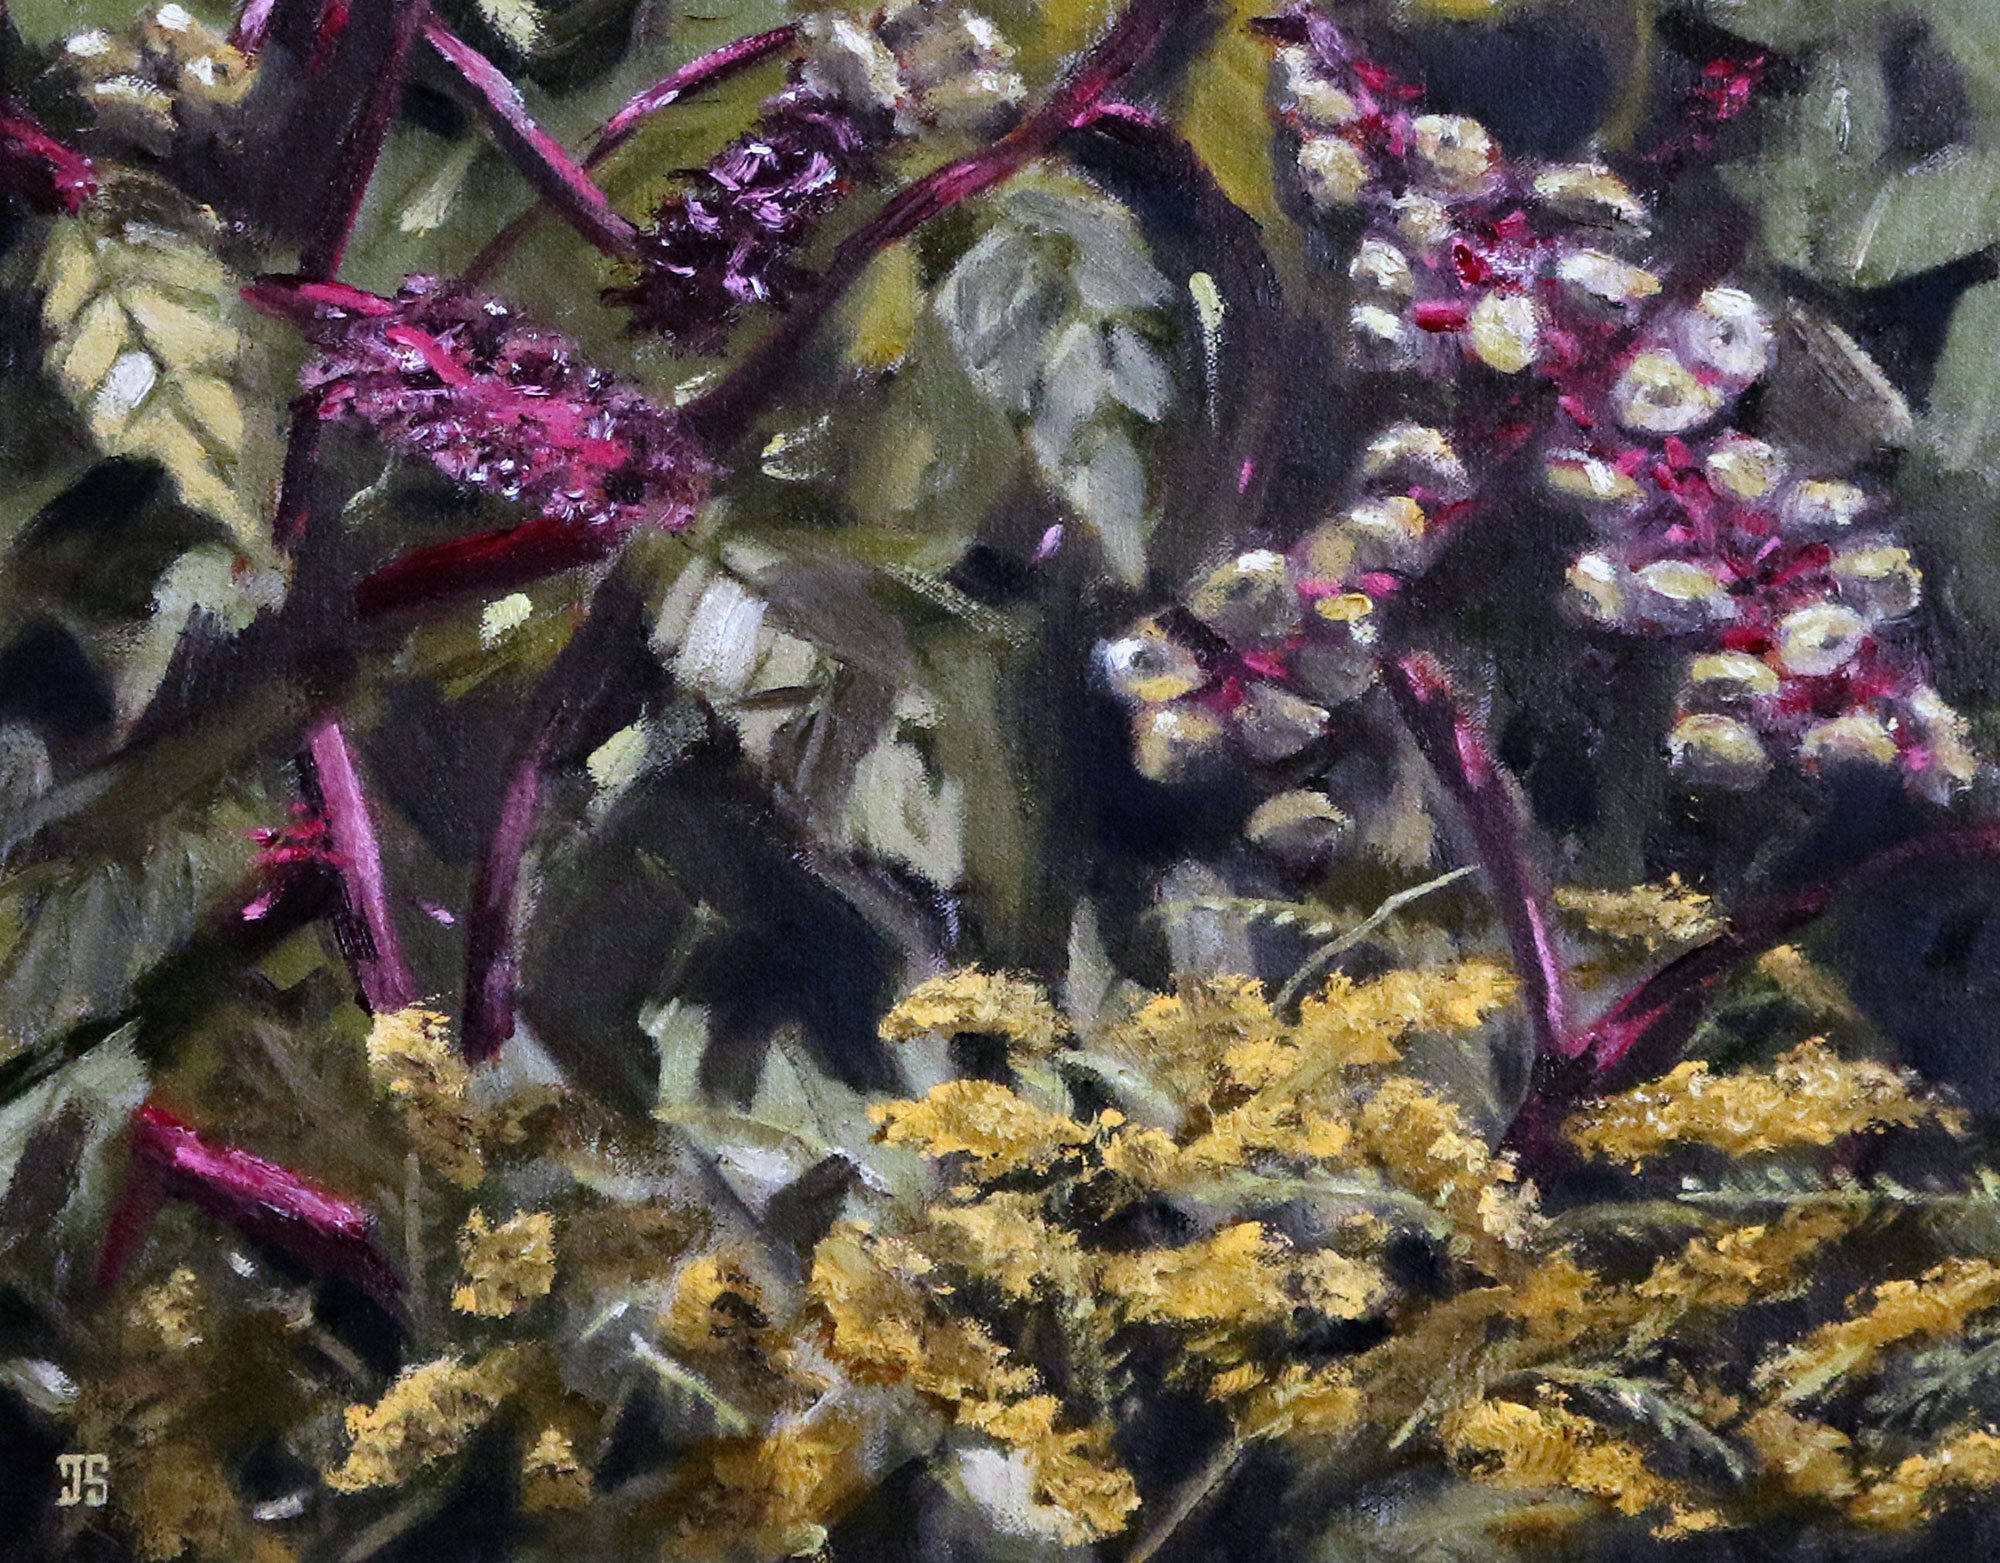 Oil painting "Pokeweed Berries and Goldenrod" by Jeffrey Dale Starr